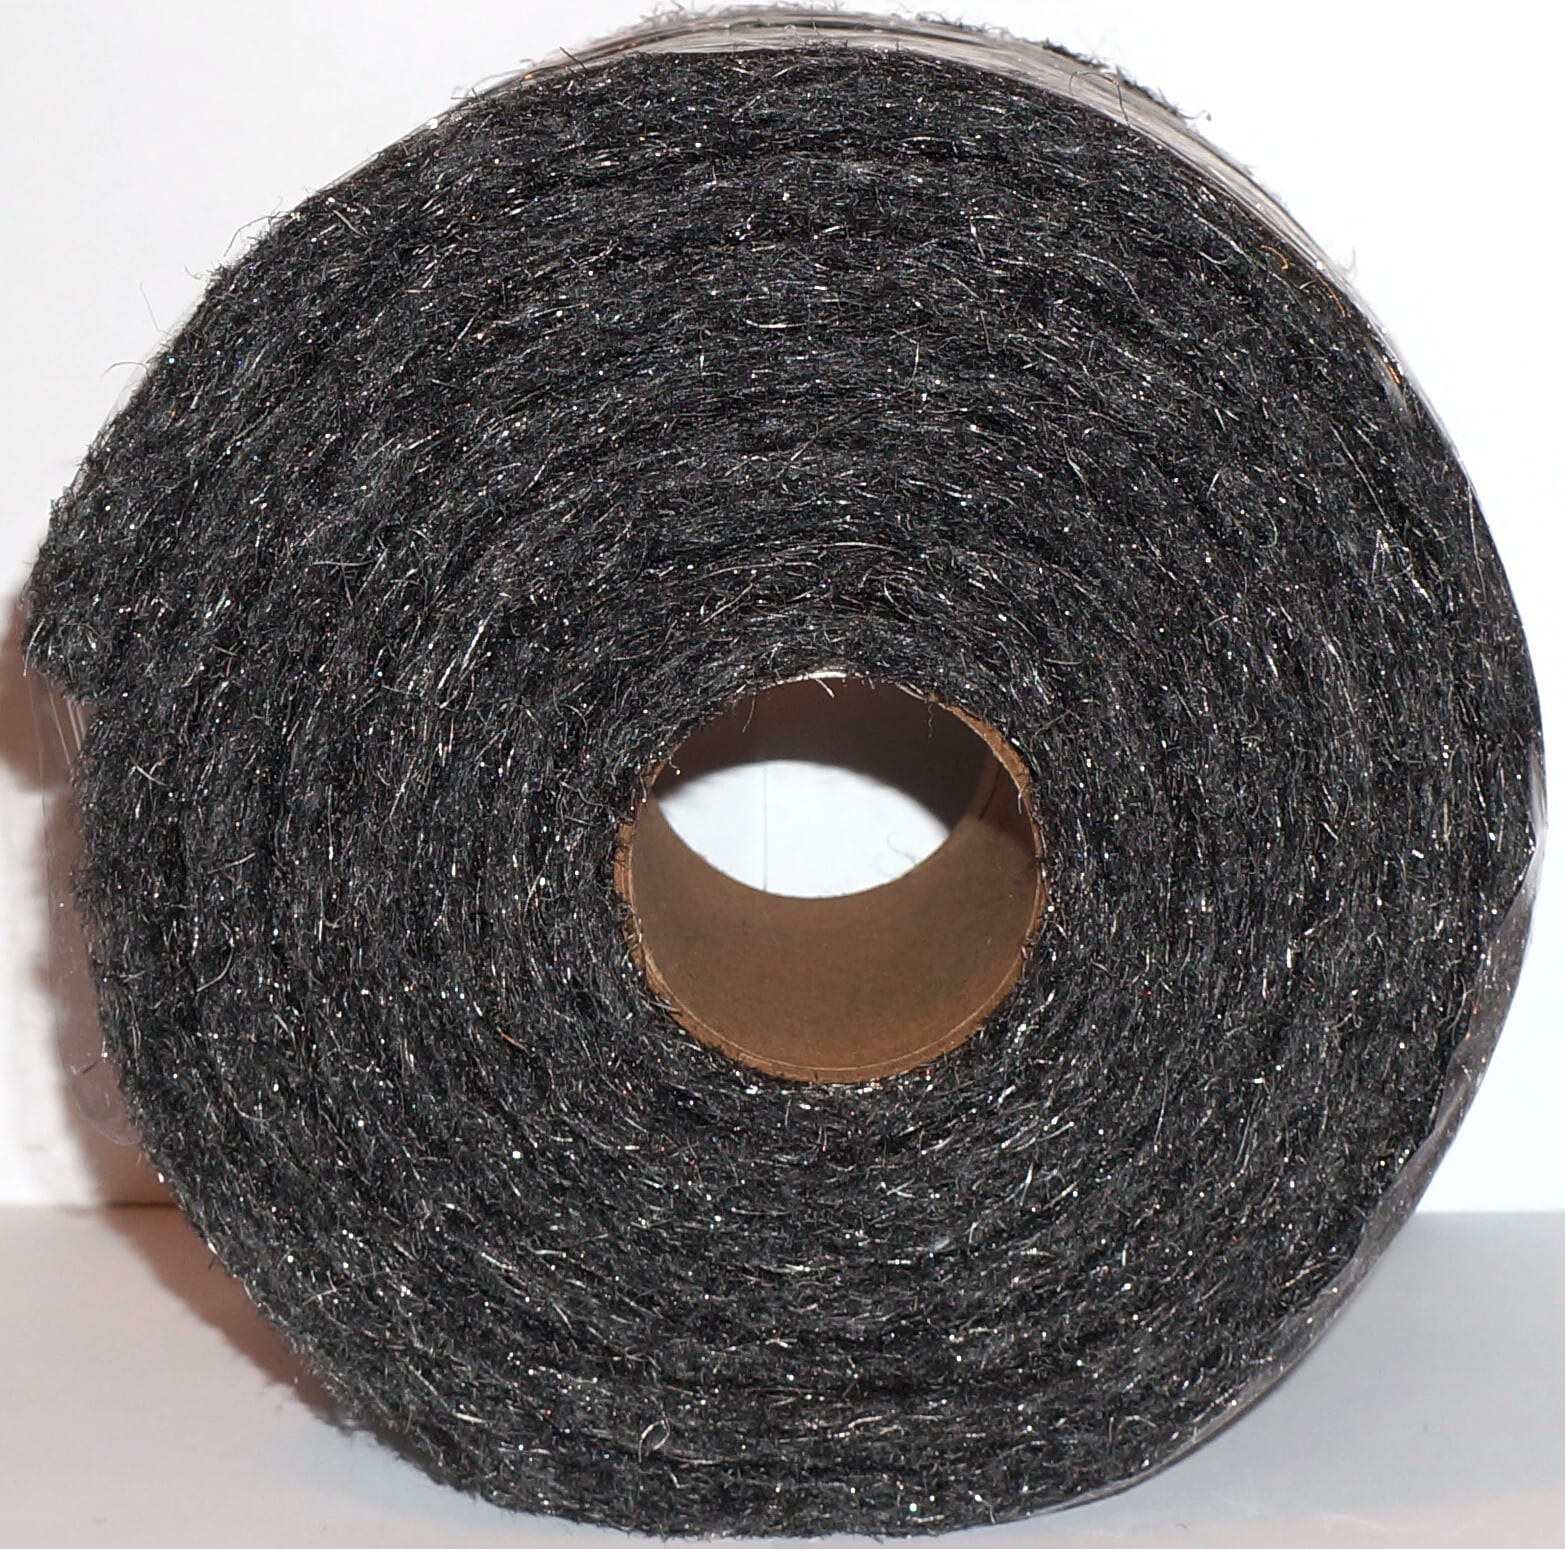 Bird B Gone Copper Mesh 20 ft. Roll for Rodent and Bird Control